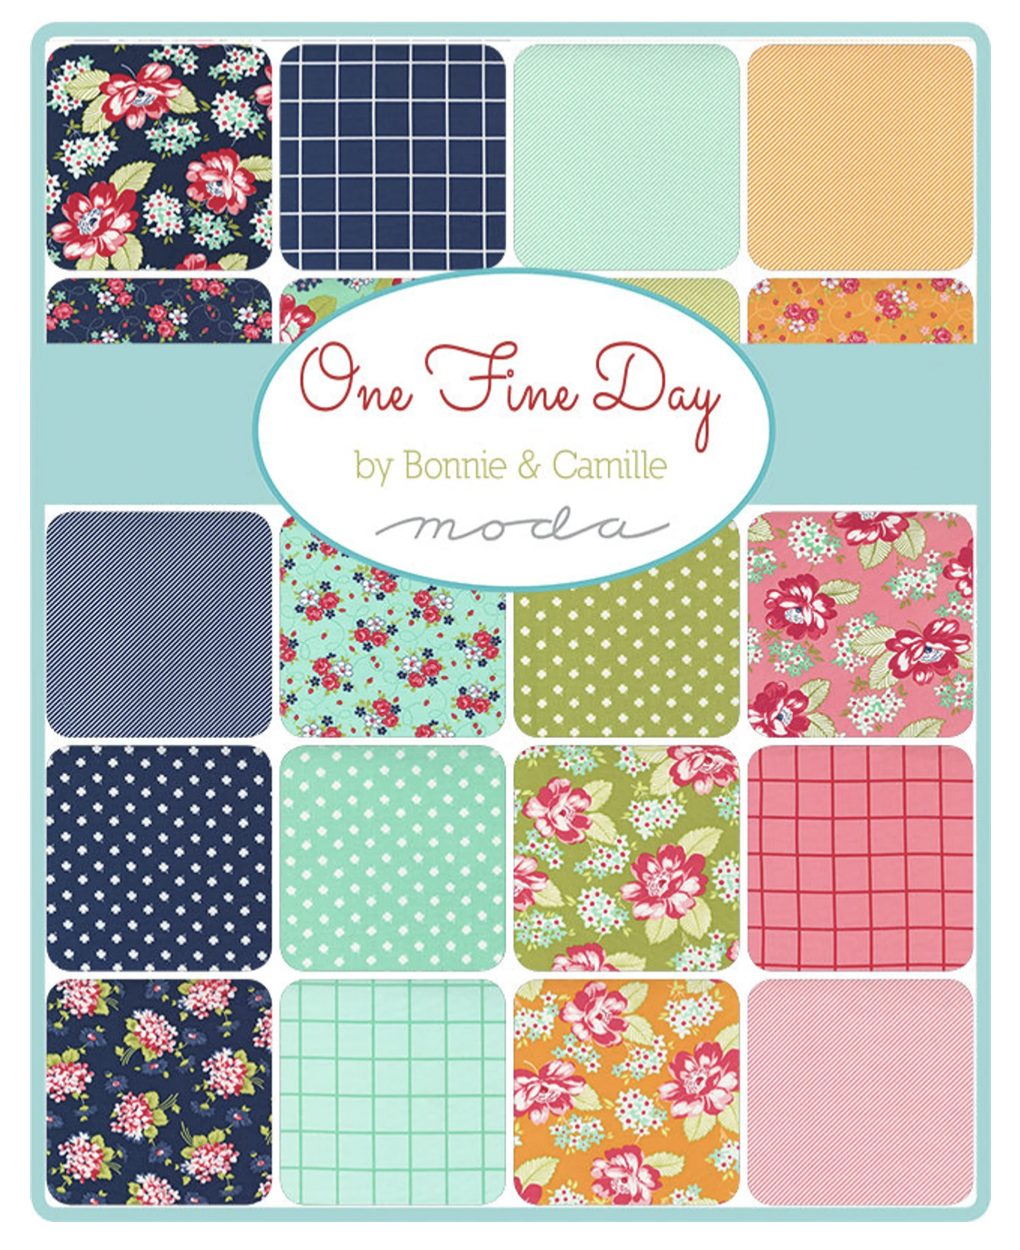 One Fine Day JELLY ROLL by Bonnie & Camille for Moda Fabrics